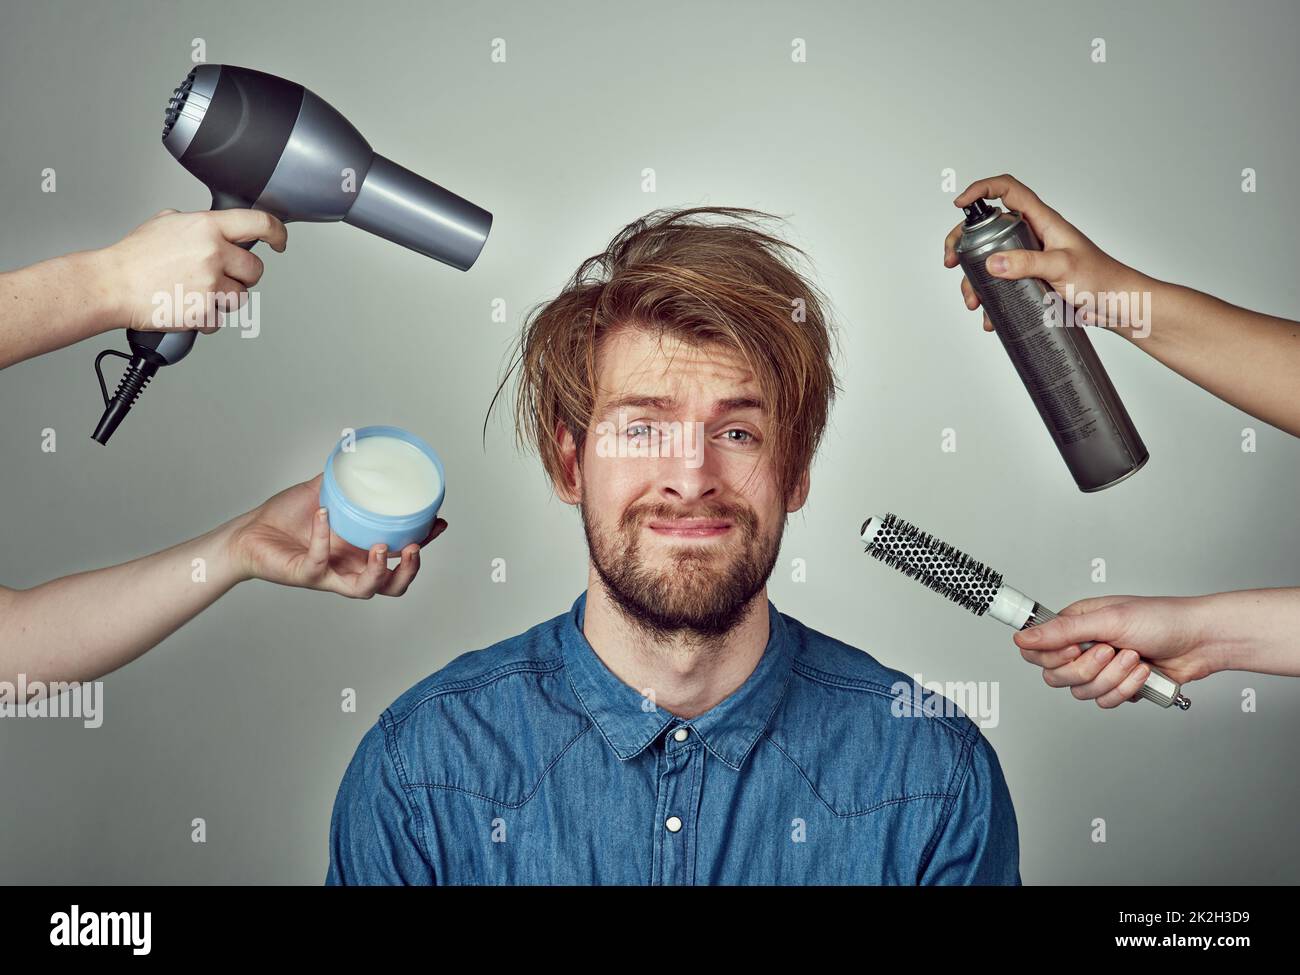 Theres no excuse for not looking your best. Studio portrait of a young man getting a hair makeover against a gray background. Stock Photo